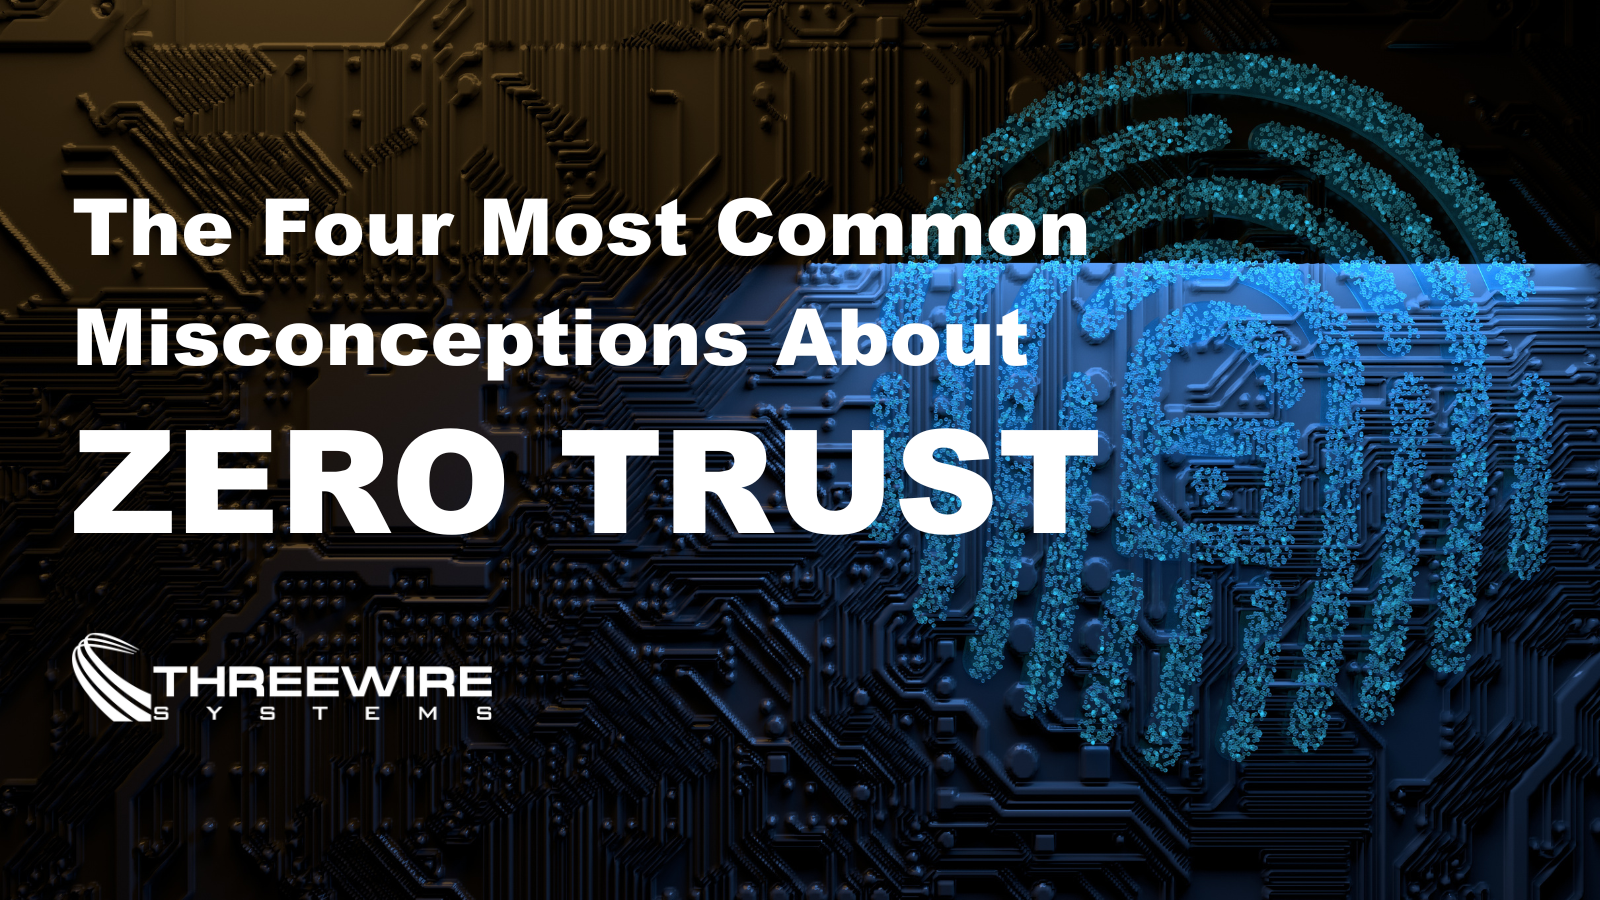 The Four Most Common Misconceptions About Zero Trust